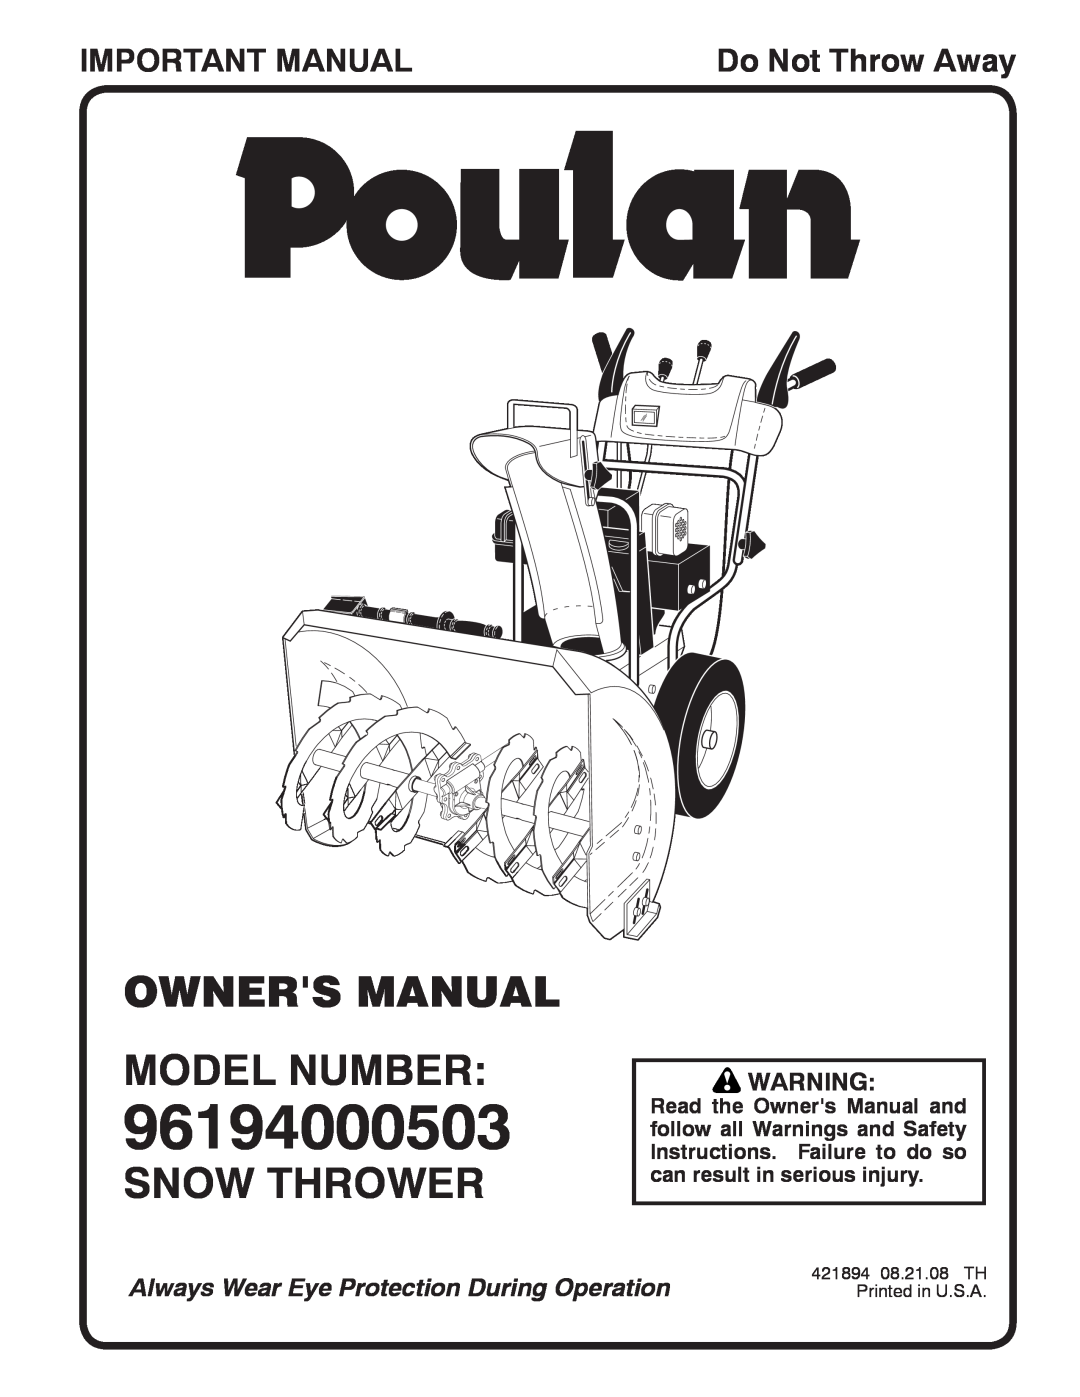 Poulan 96194000503 owner manual Snow Thrower, Important Manual, Do Not Throw Away 